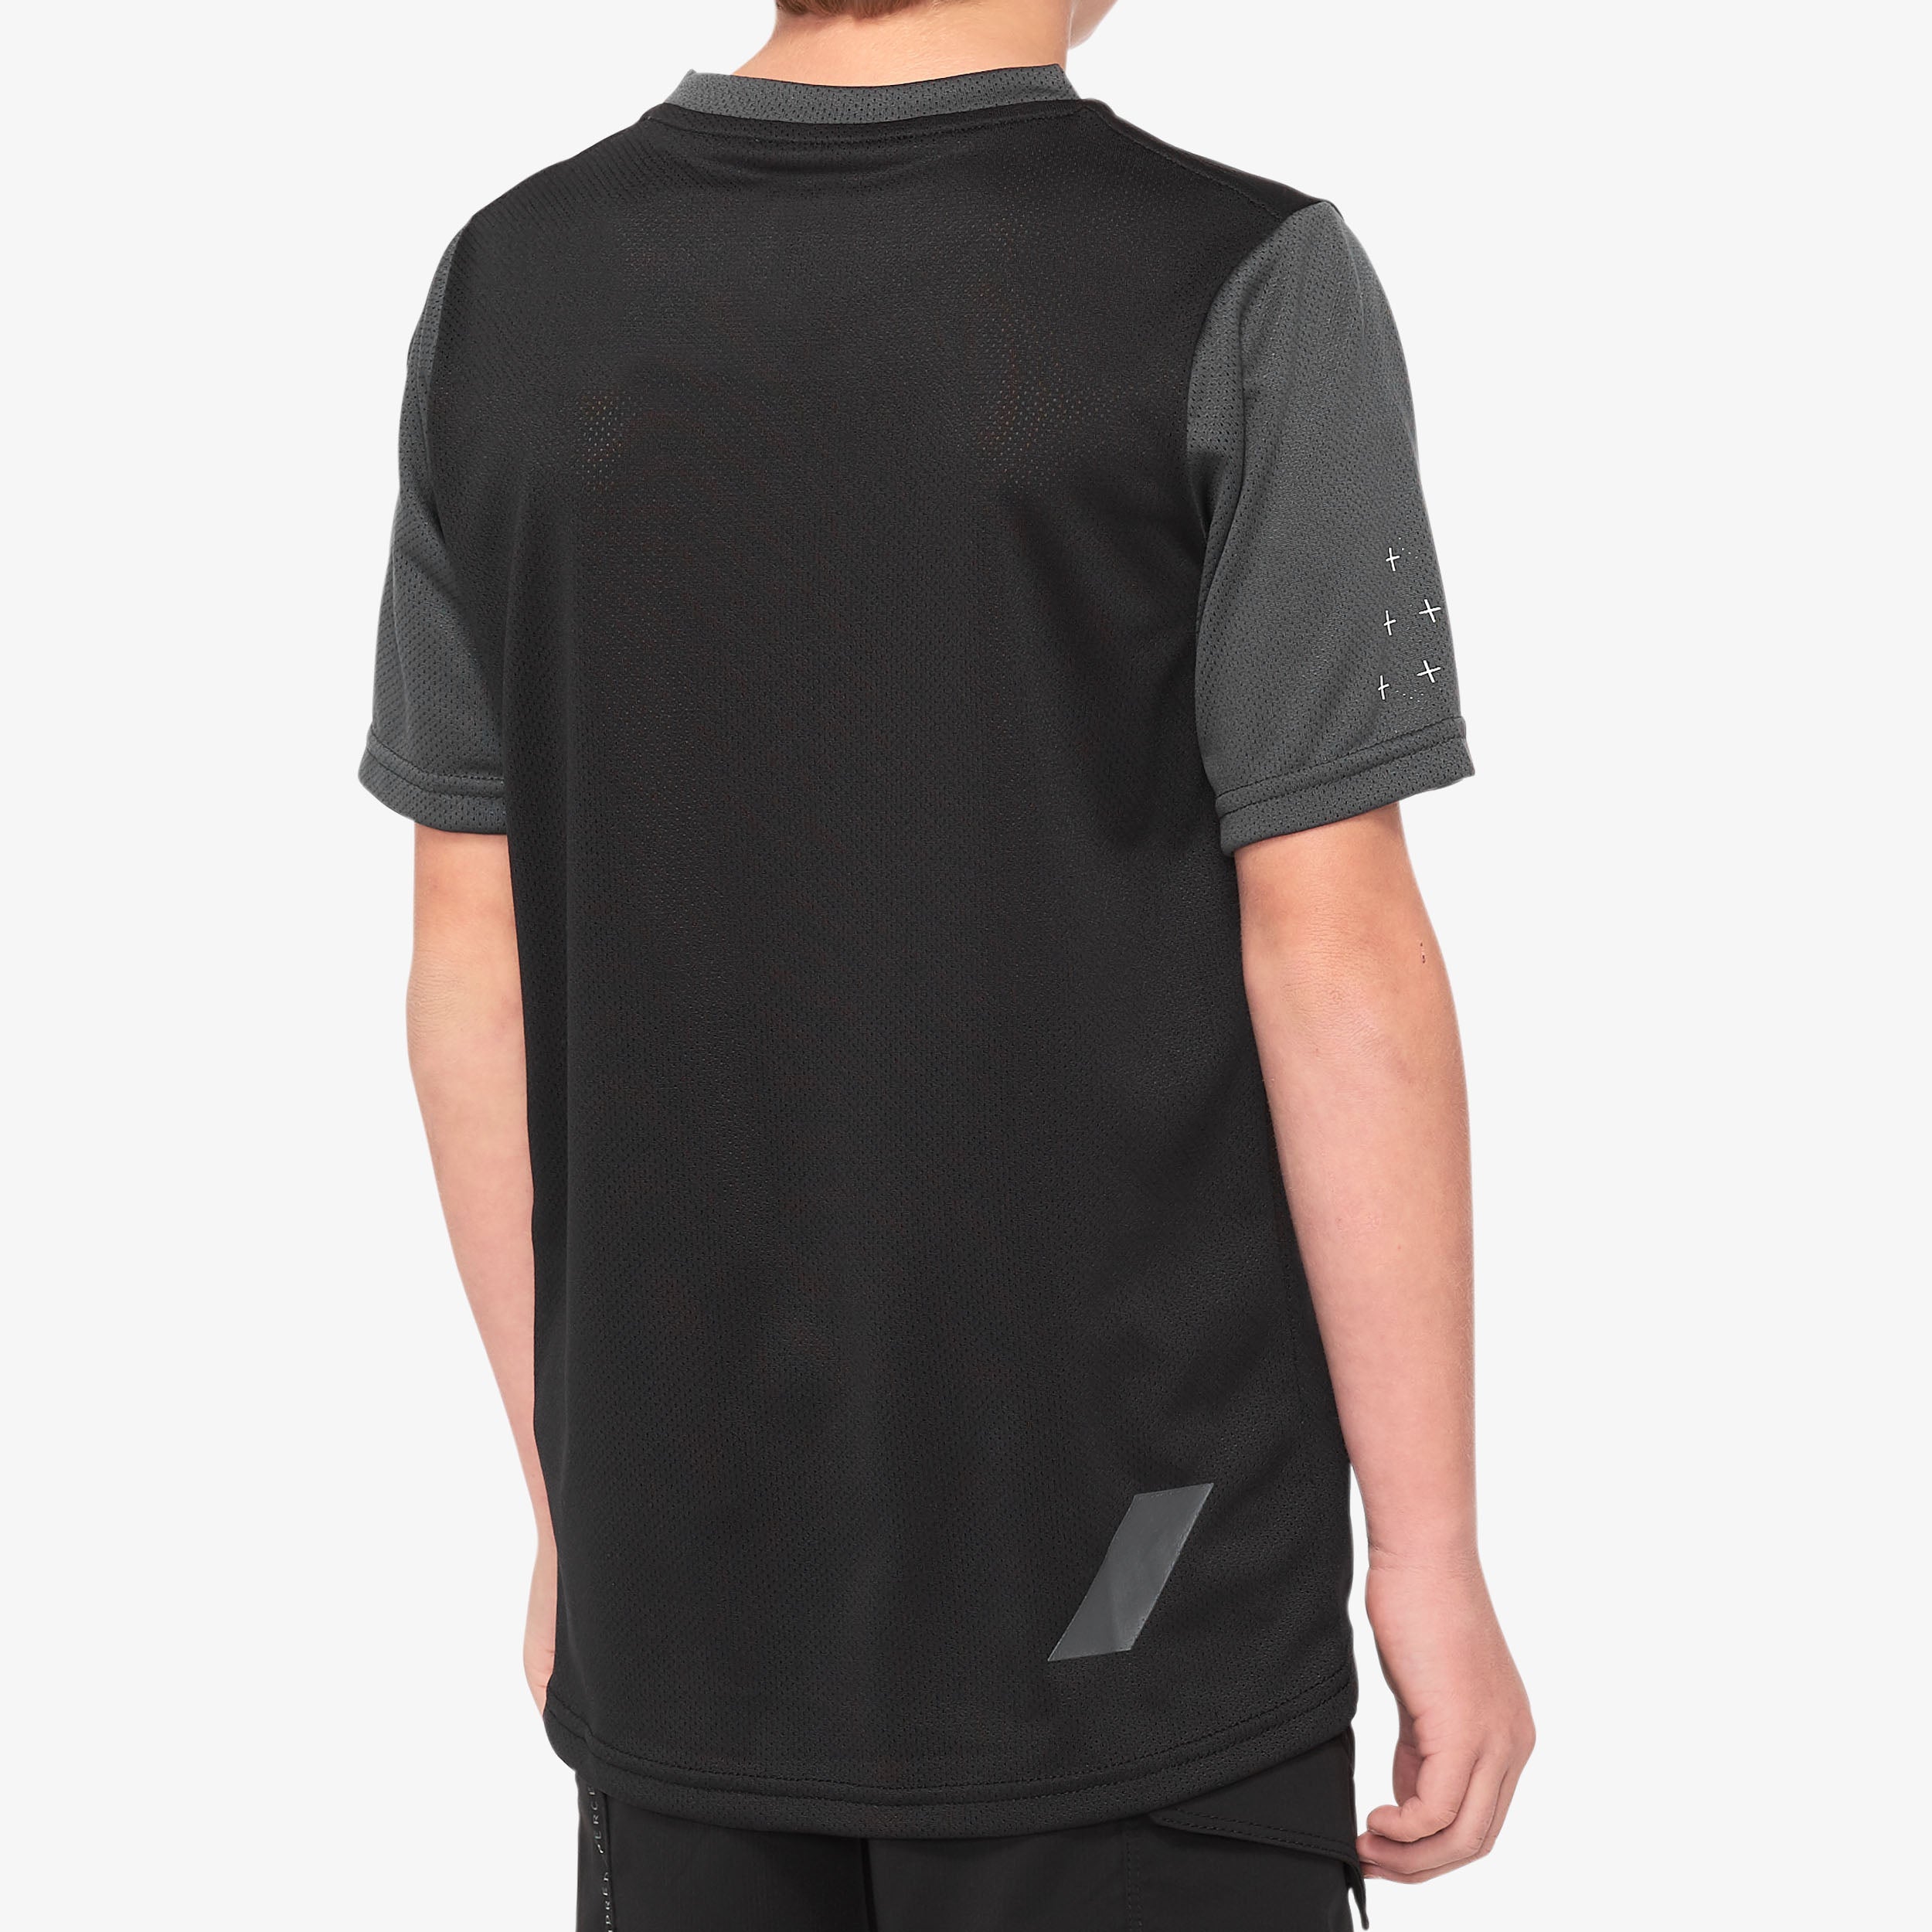 RIDECAMP Youth Jersey Black/Charcoal - Secondary